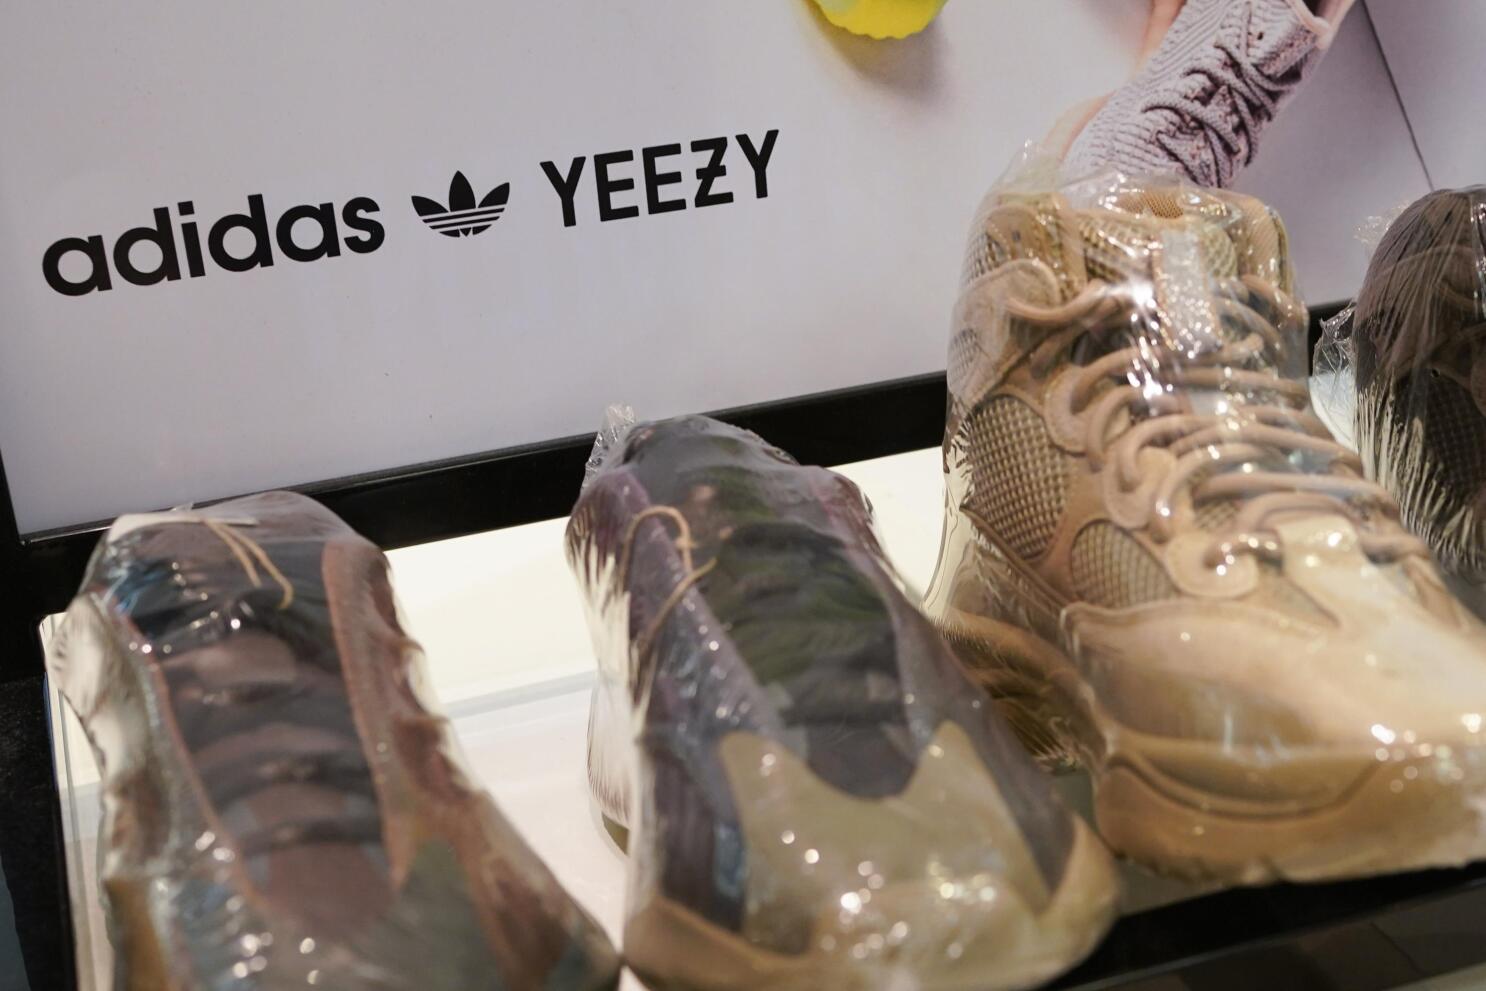 Yeezy shoes are back on sale — months after Adidas cut ties with Kanye West